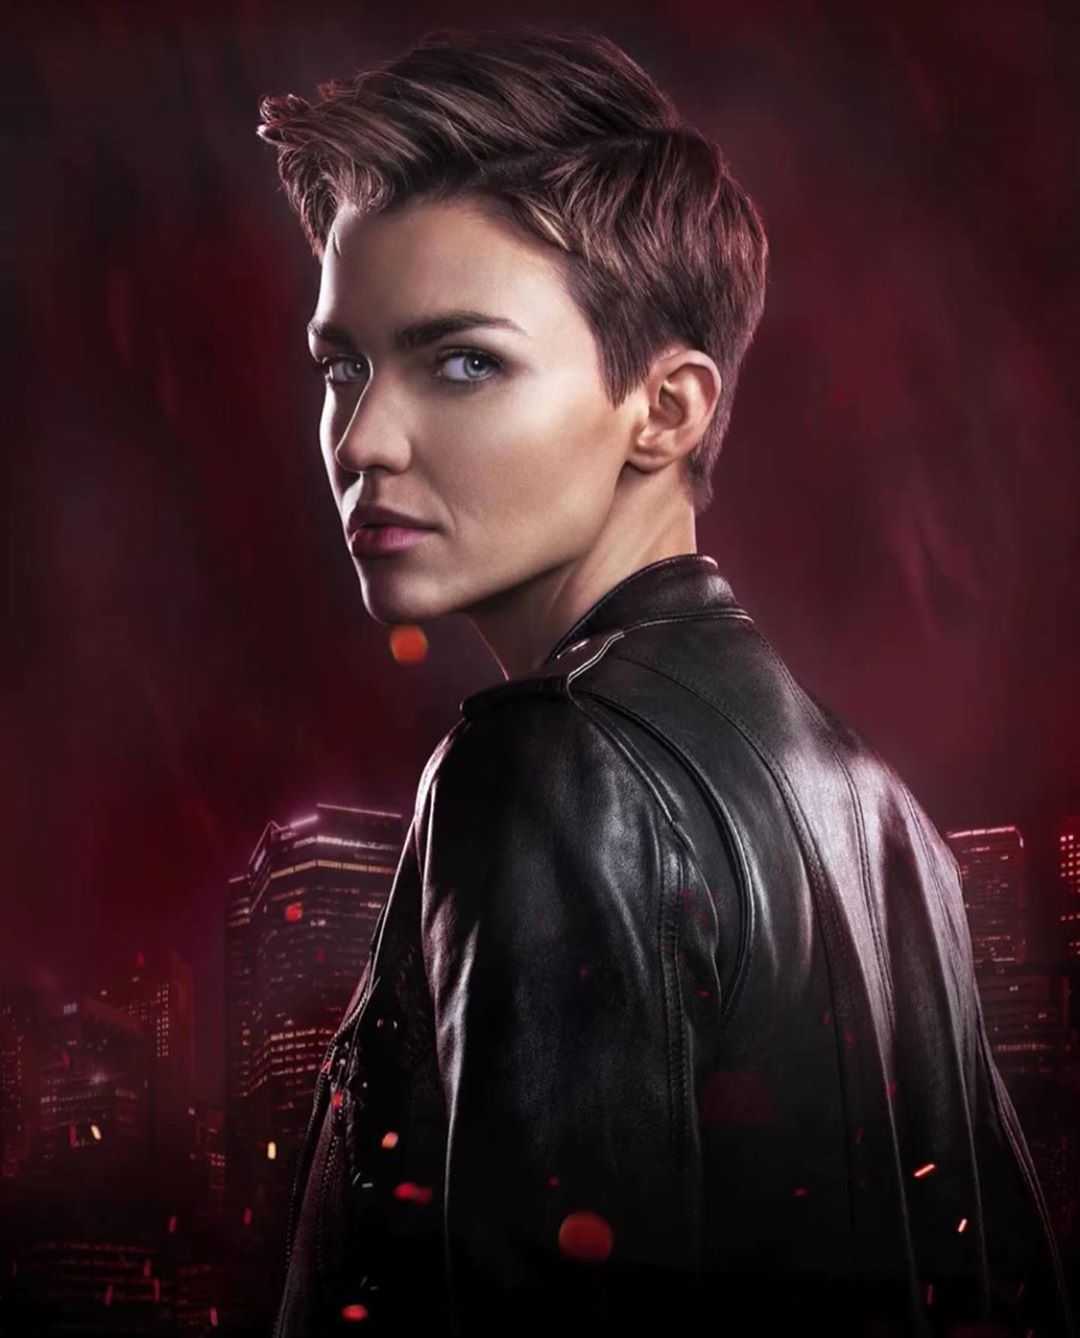 70+ Hot Pictures Of Ruby Rose – Batgirl In Arrowverse And Orange Is The New Black Star. 59